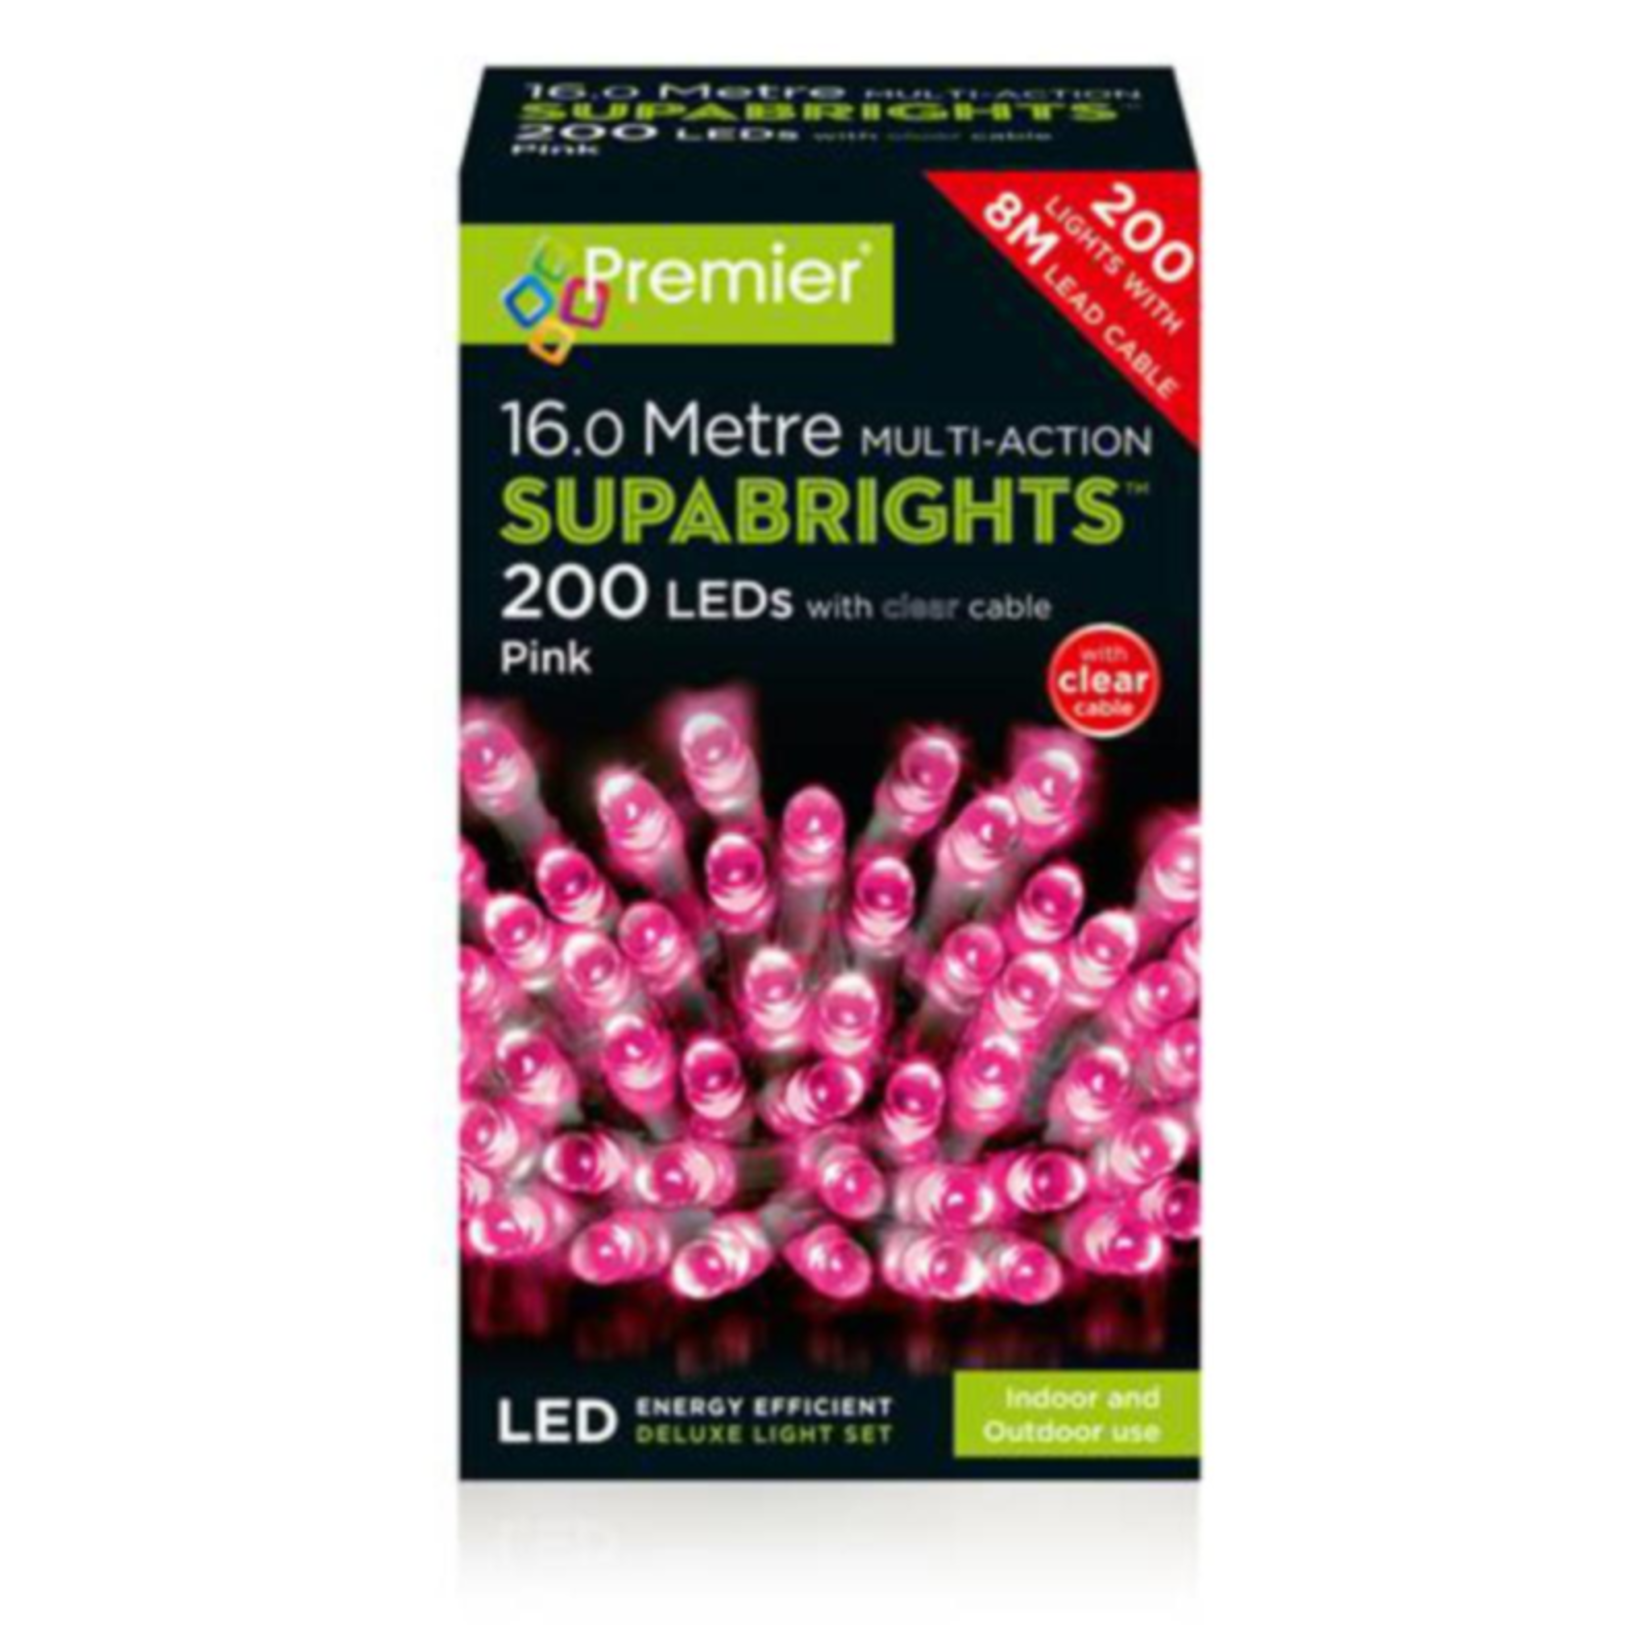 200 M-A SupaBrights Pink LEDs Lights with timer